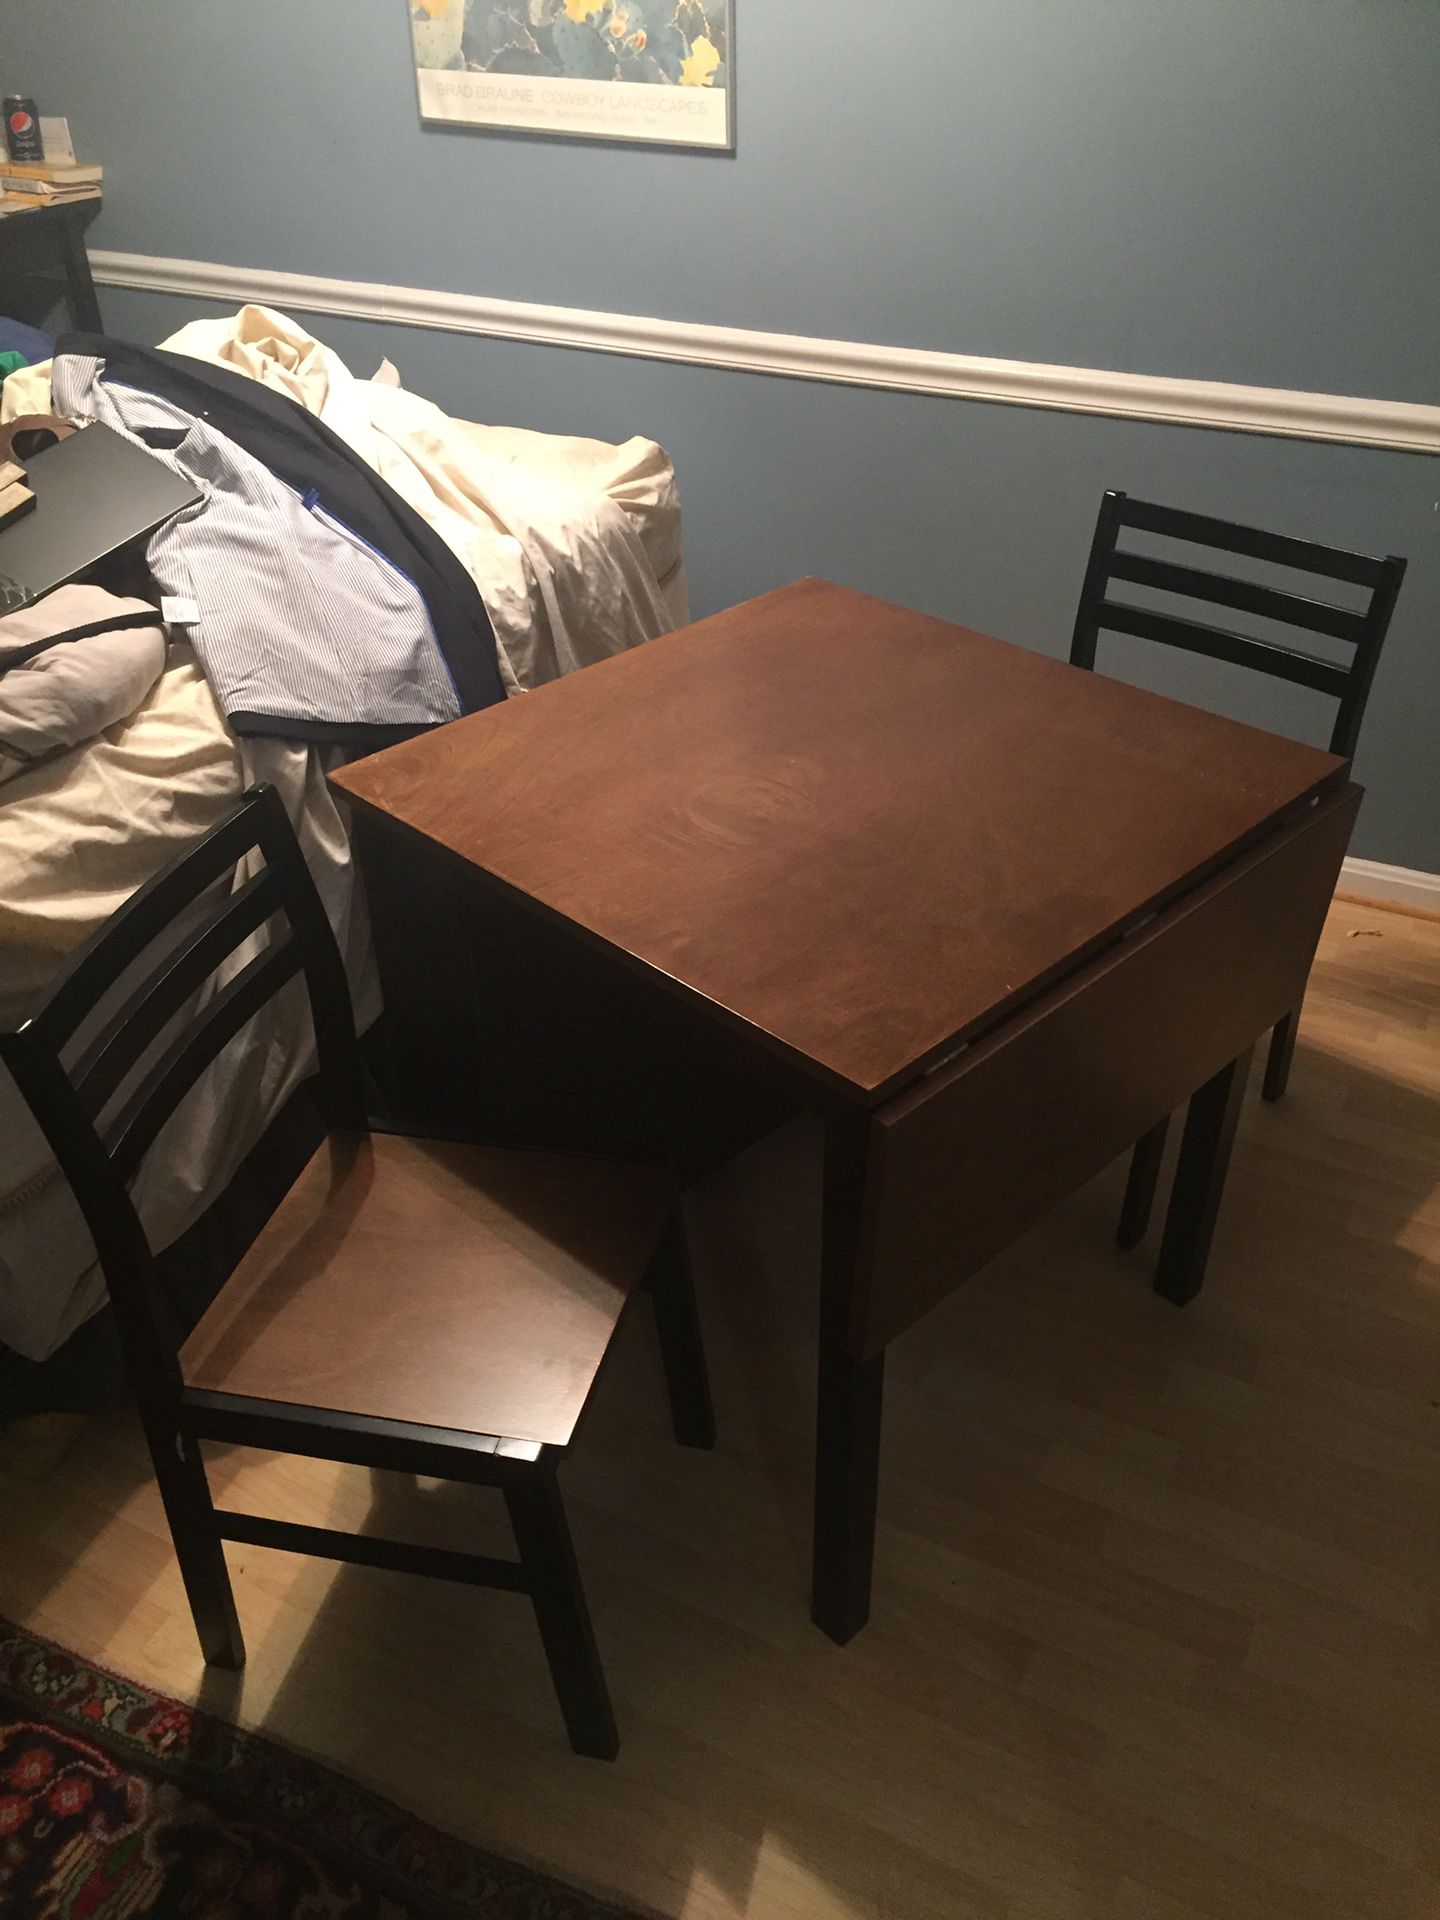 Small Fold out Table with shelf and Chairs